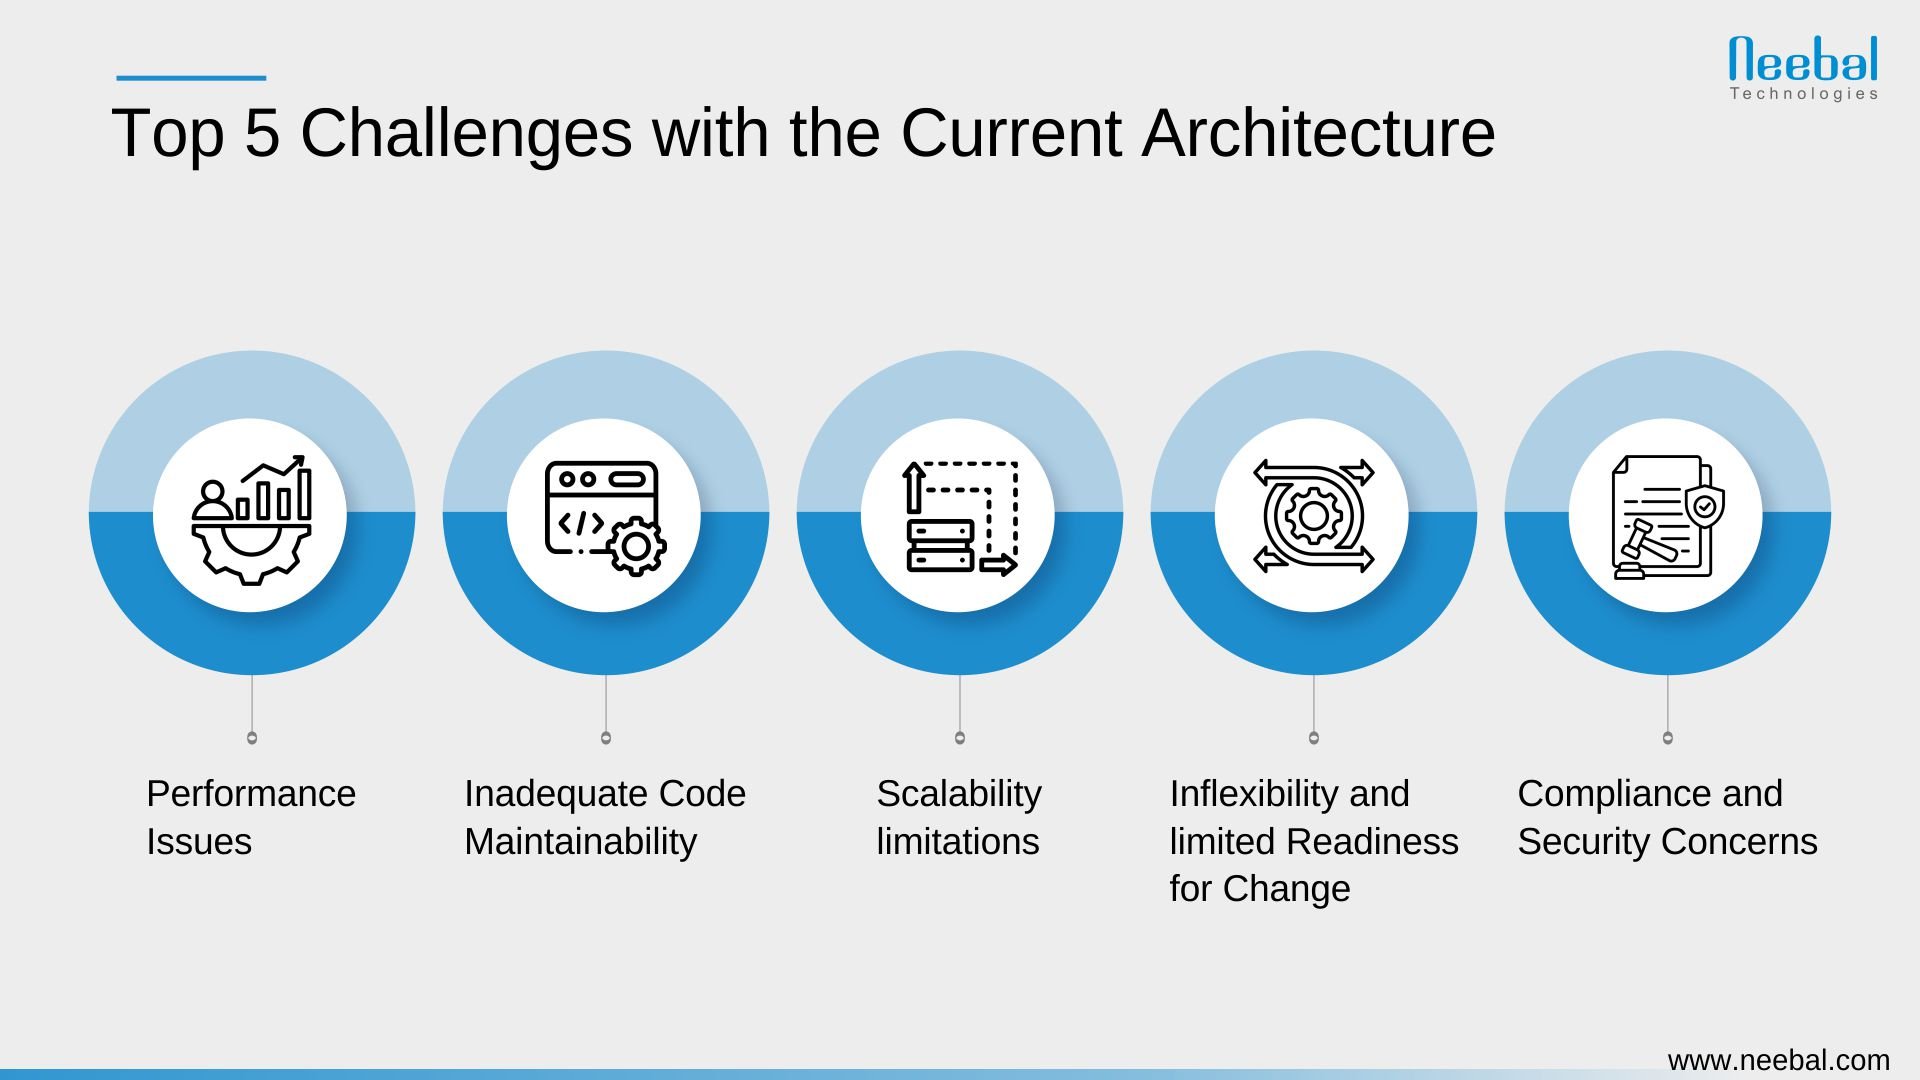 Top 5 Challenges with the Current Architecture